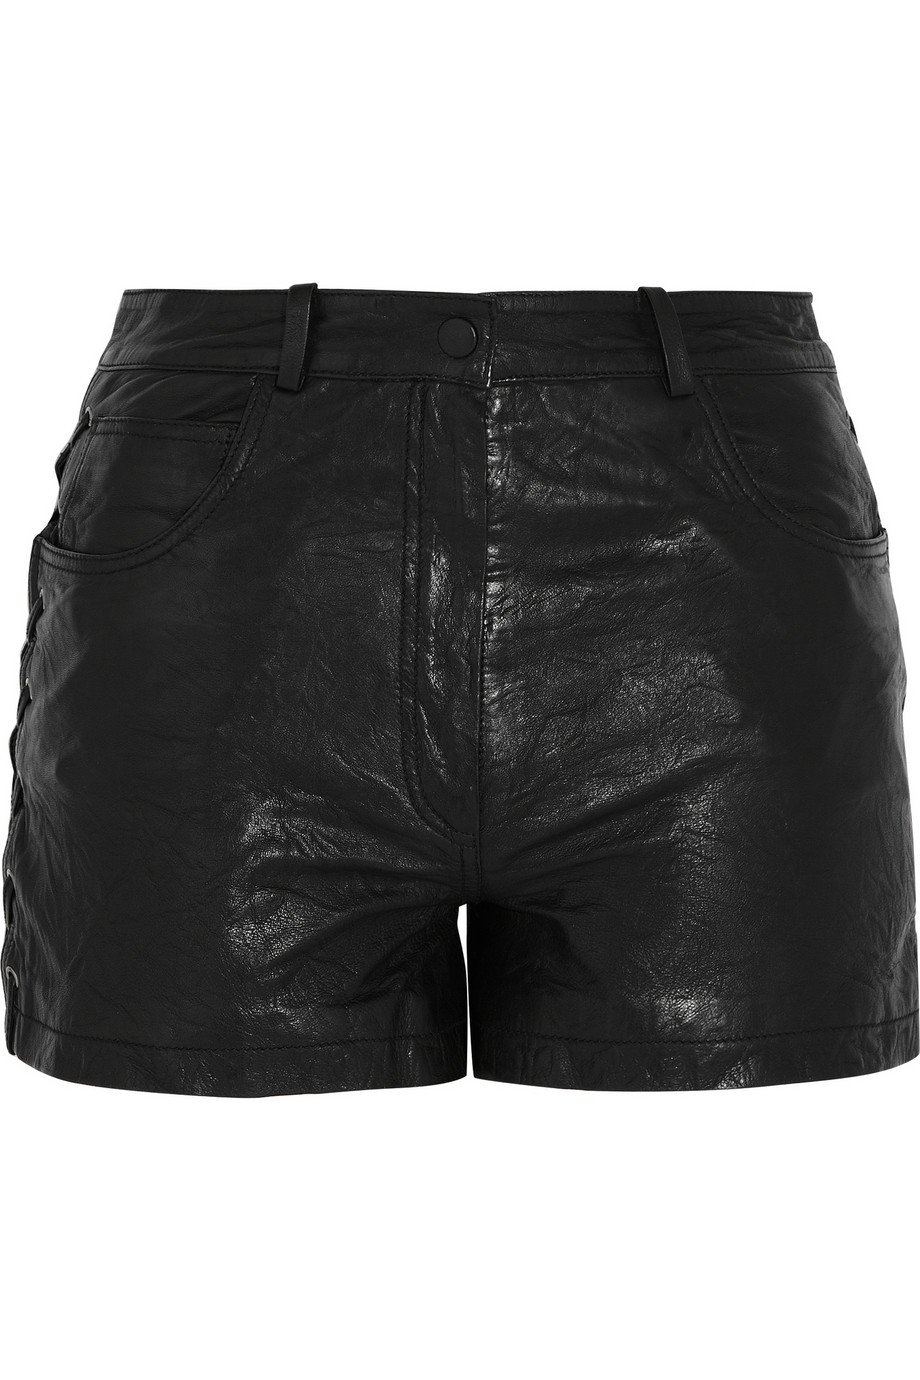 Maje Ennivre Lace-Up Textured-Leather Shorts in Black - Lyst